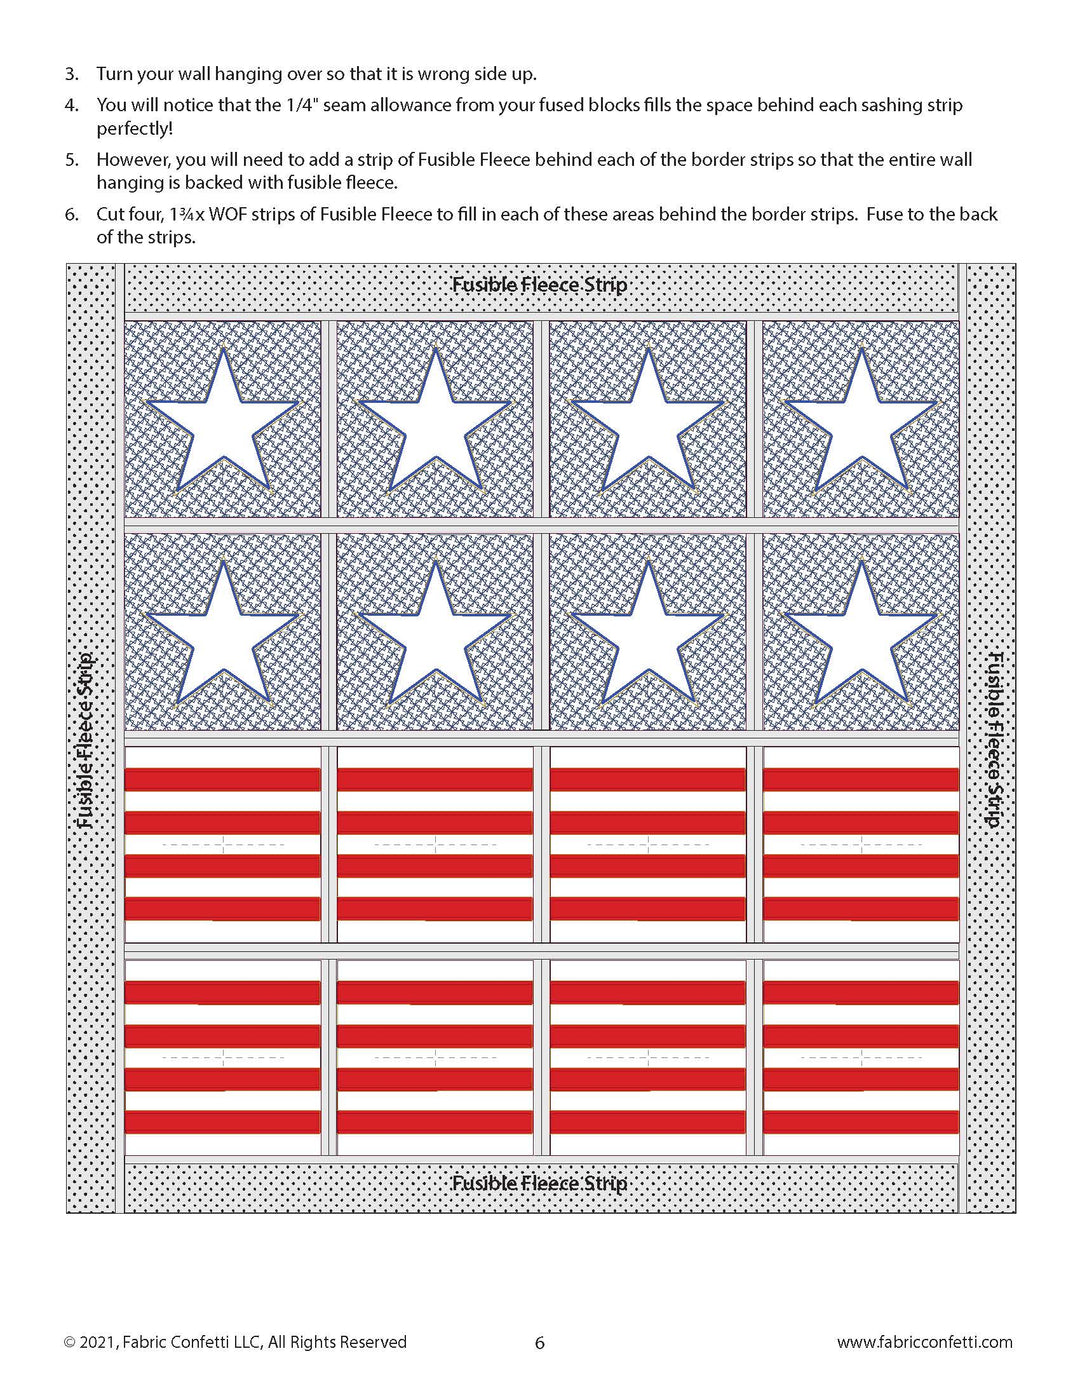 Stars and Stripes ITH Wall Hanging